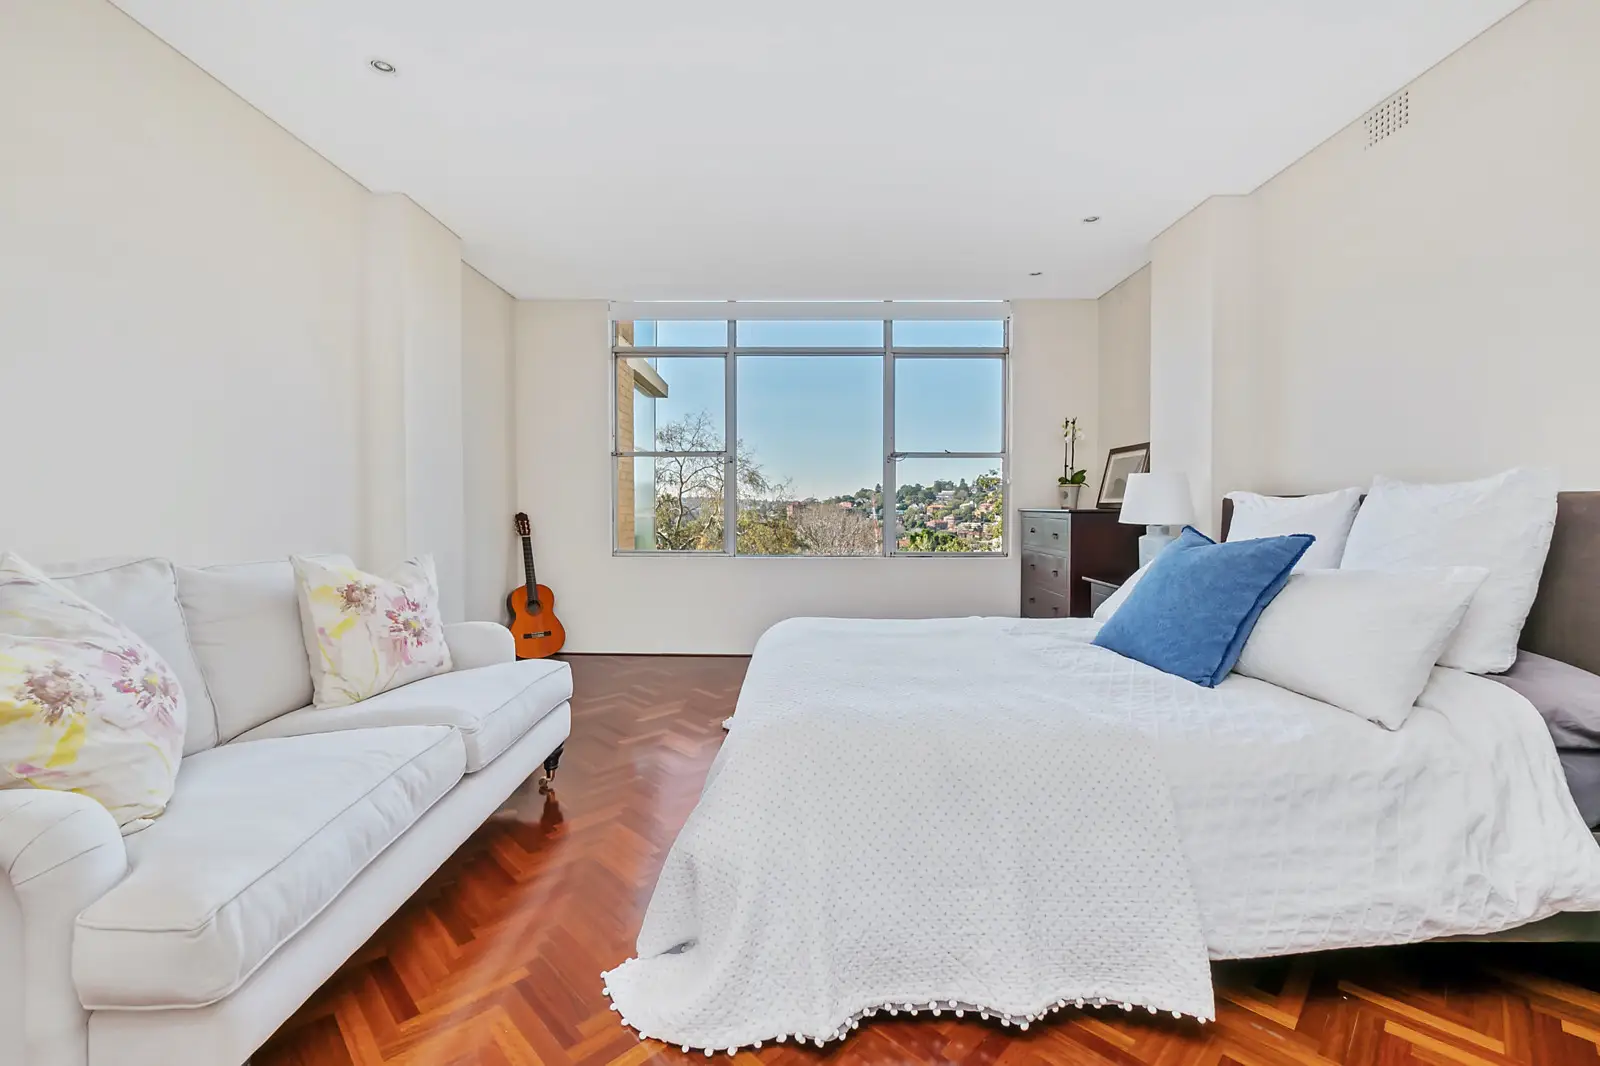 2A/9 St Marks Road, Darling Point Sold by Bradfield Badgerfox - image 1